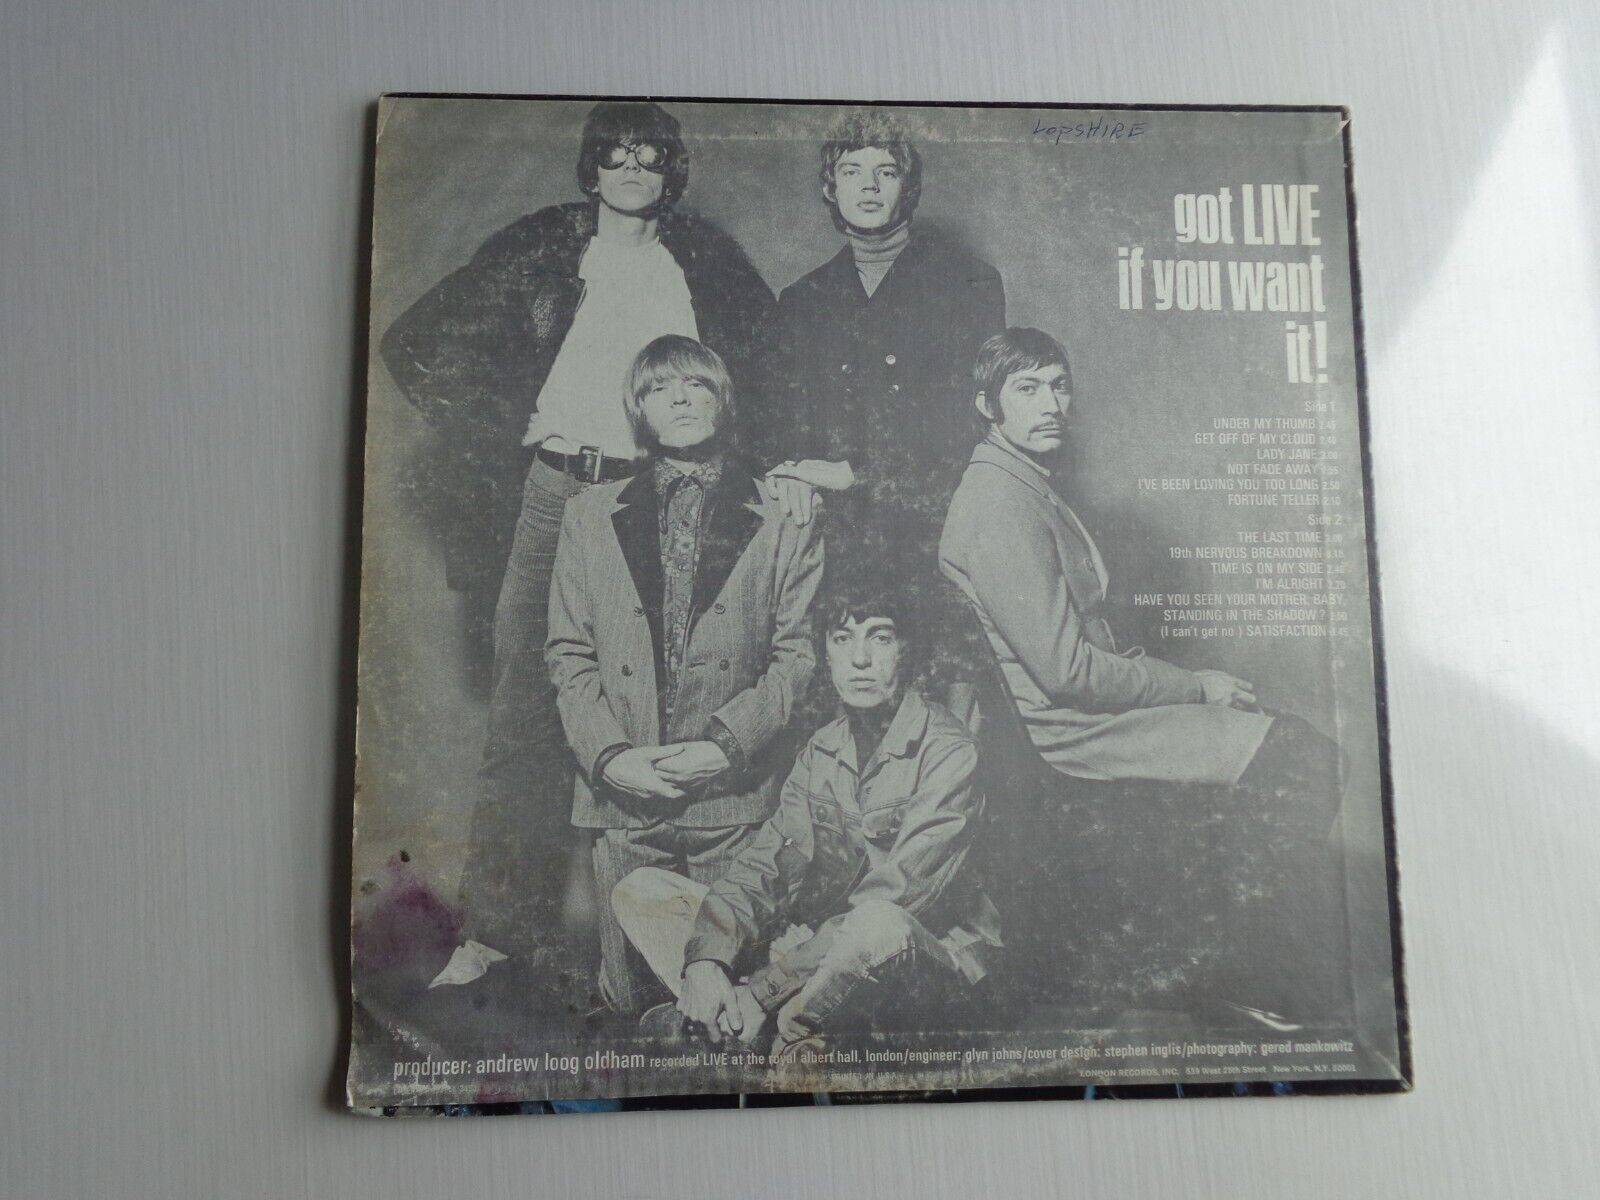 ::The Rolling Stones - Got Live If You Want It! 33 RPM London Records